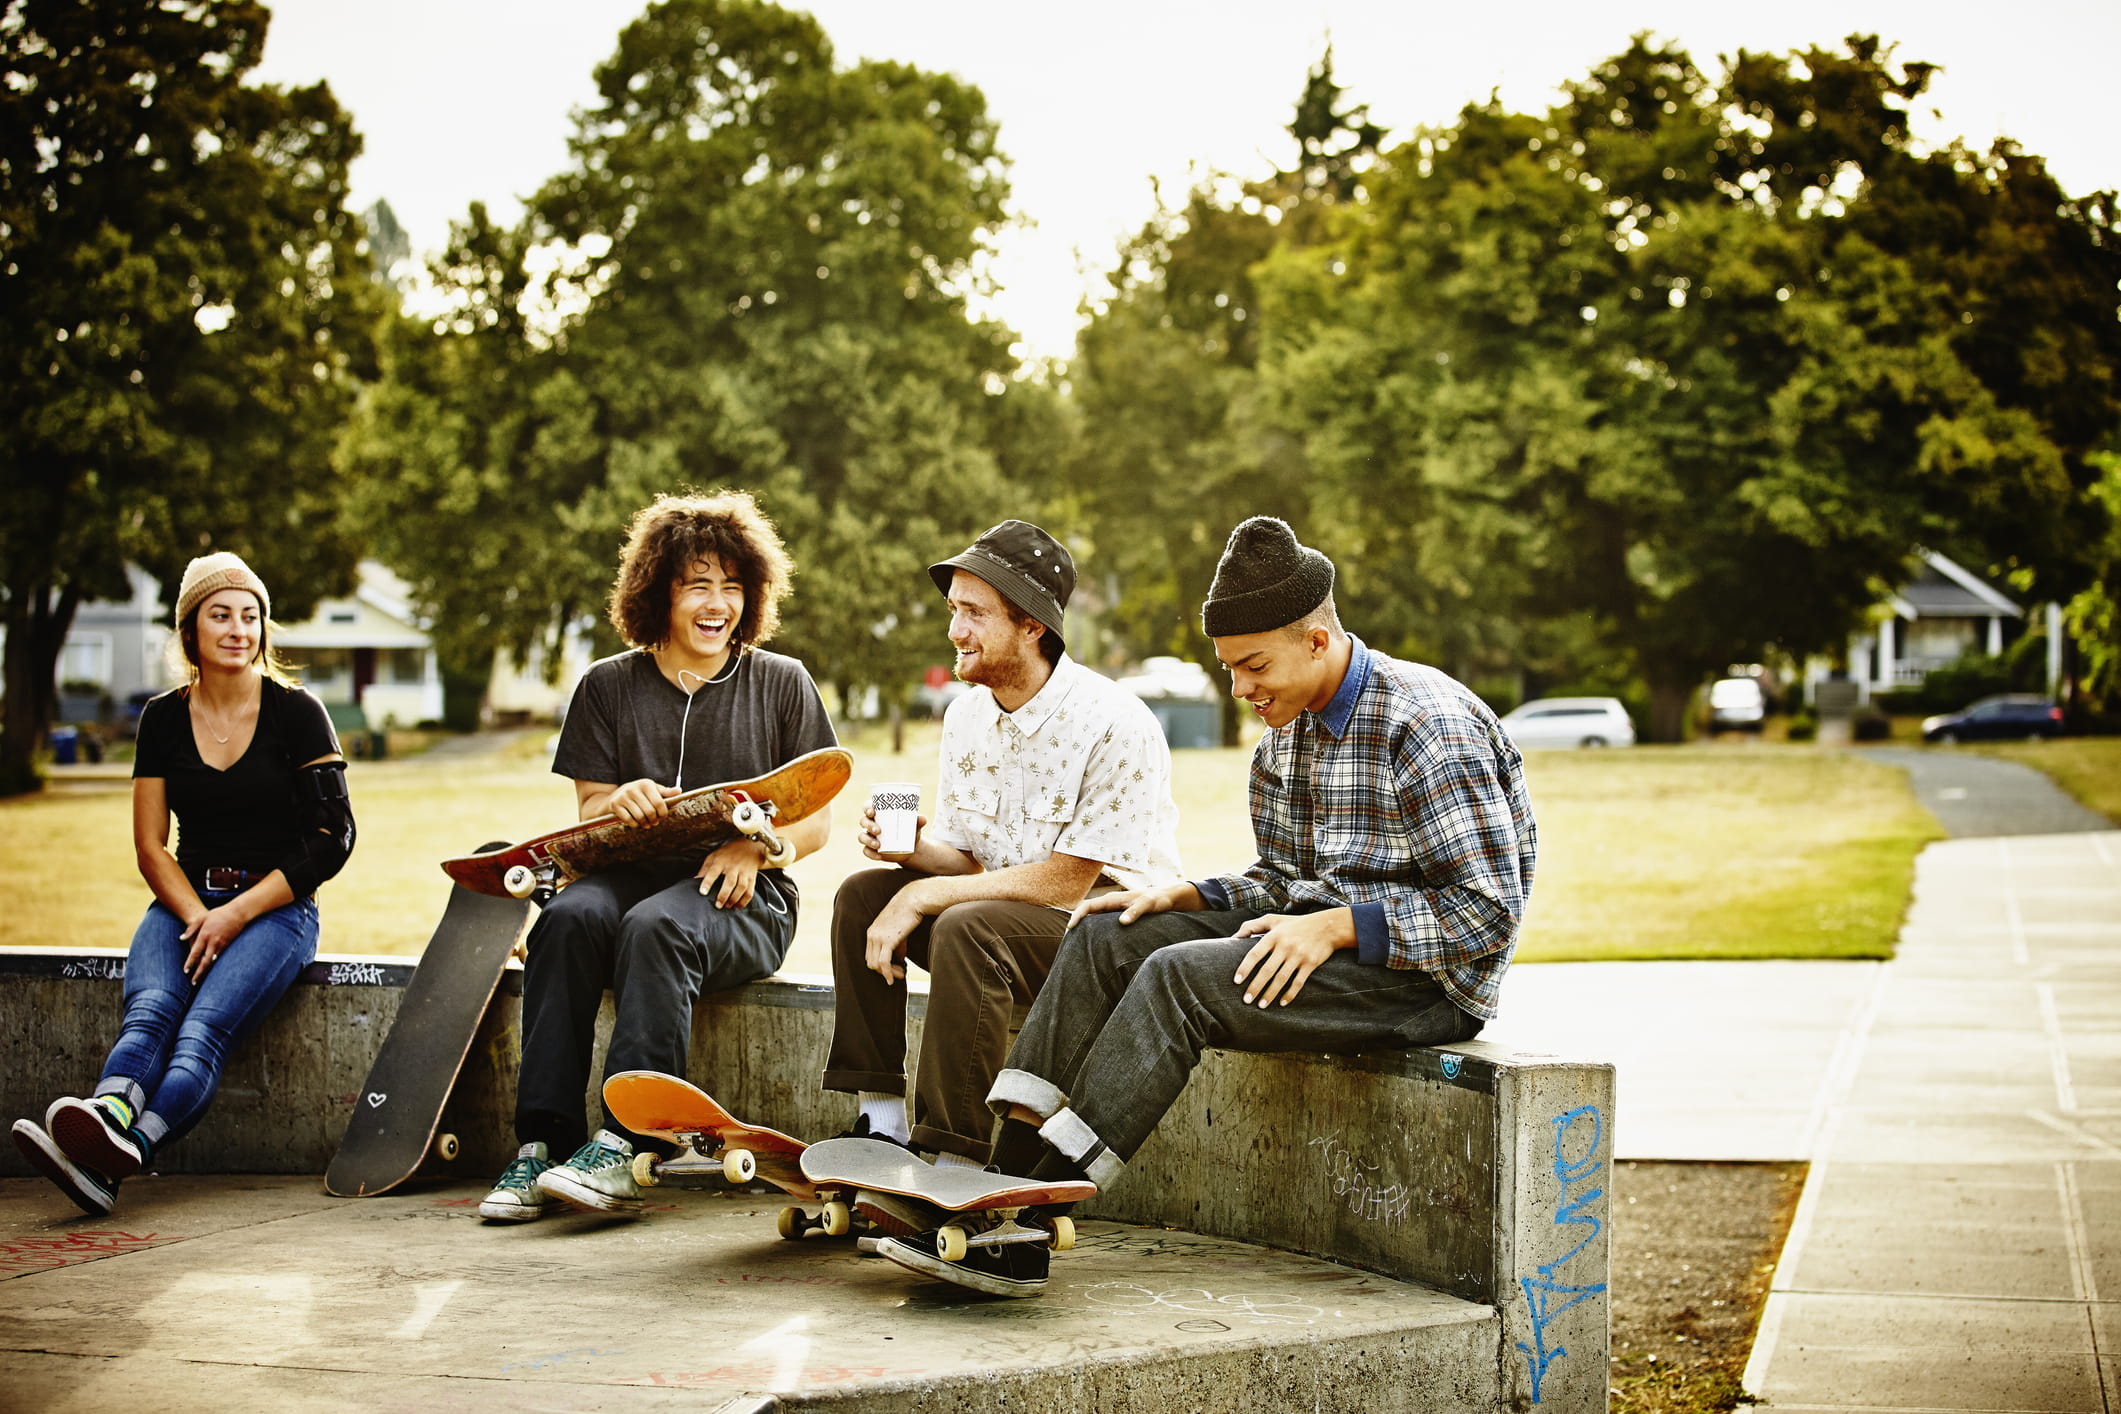 Group of young people at a skate park having a laugh